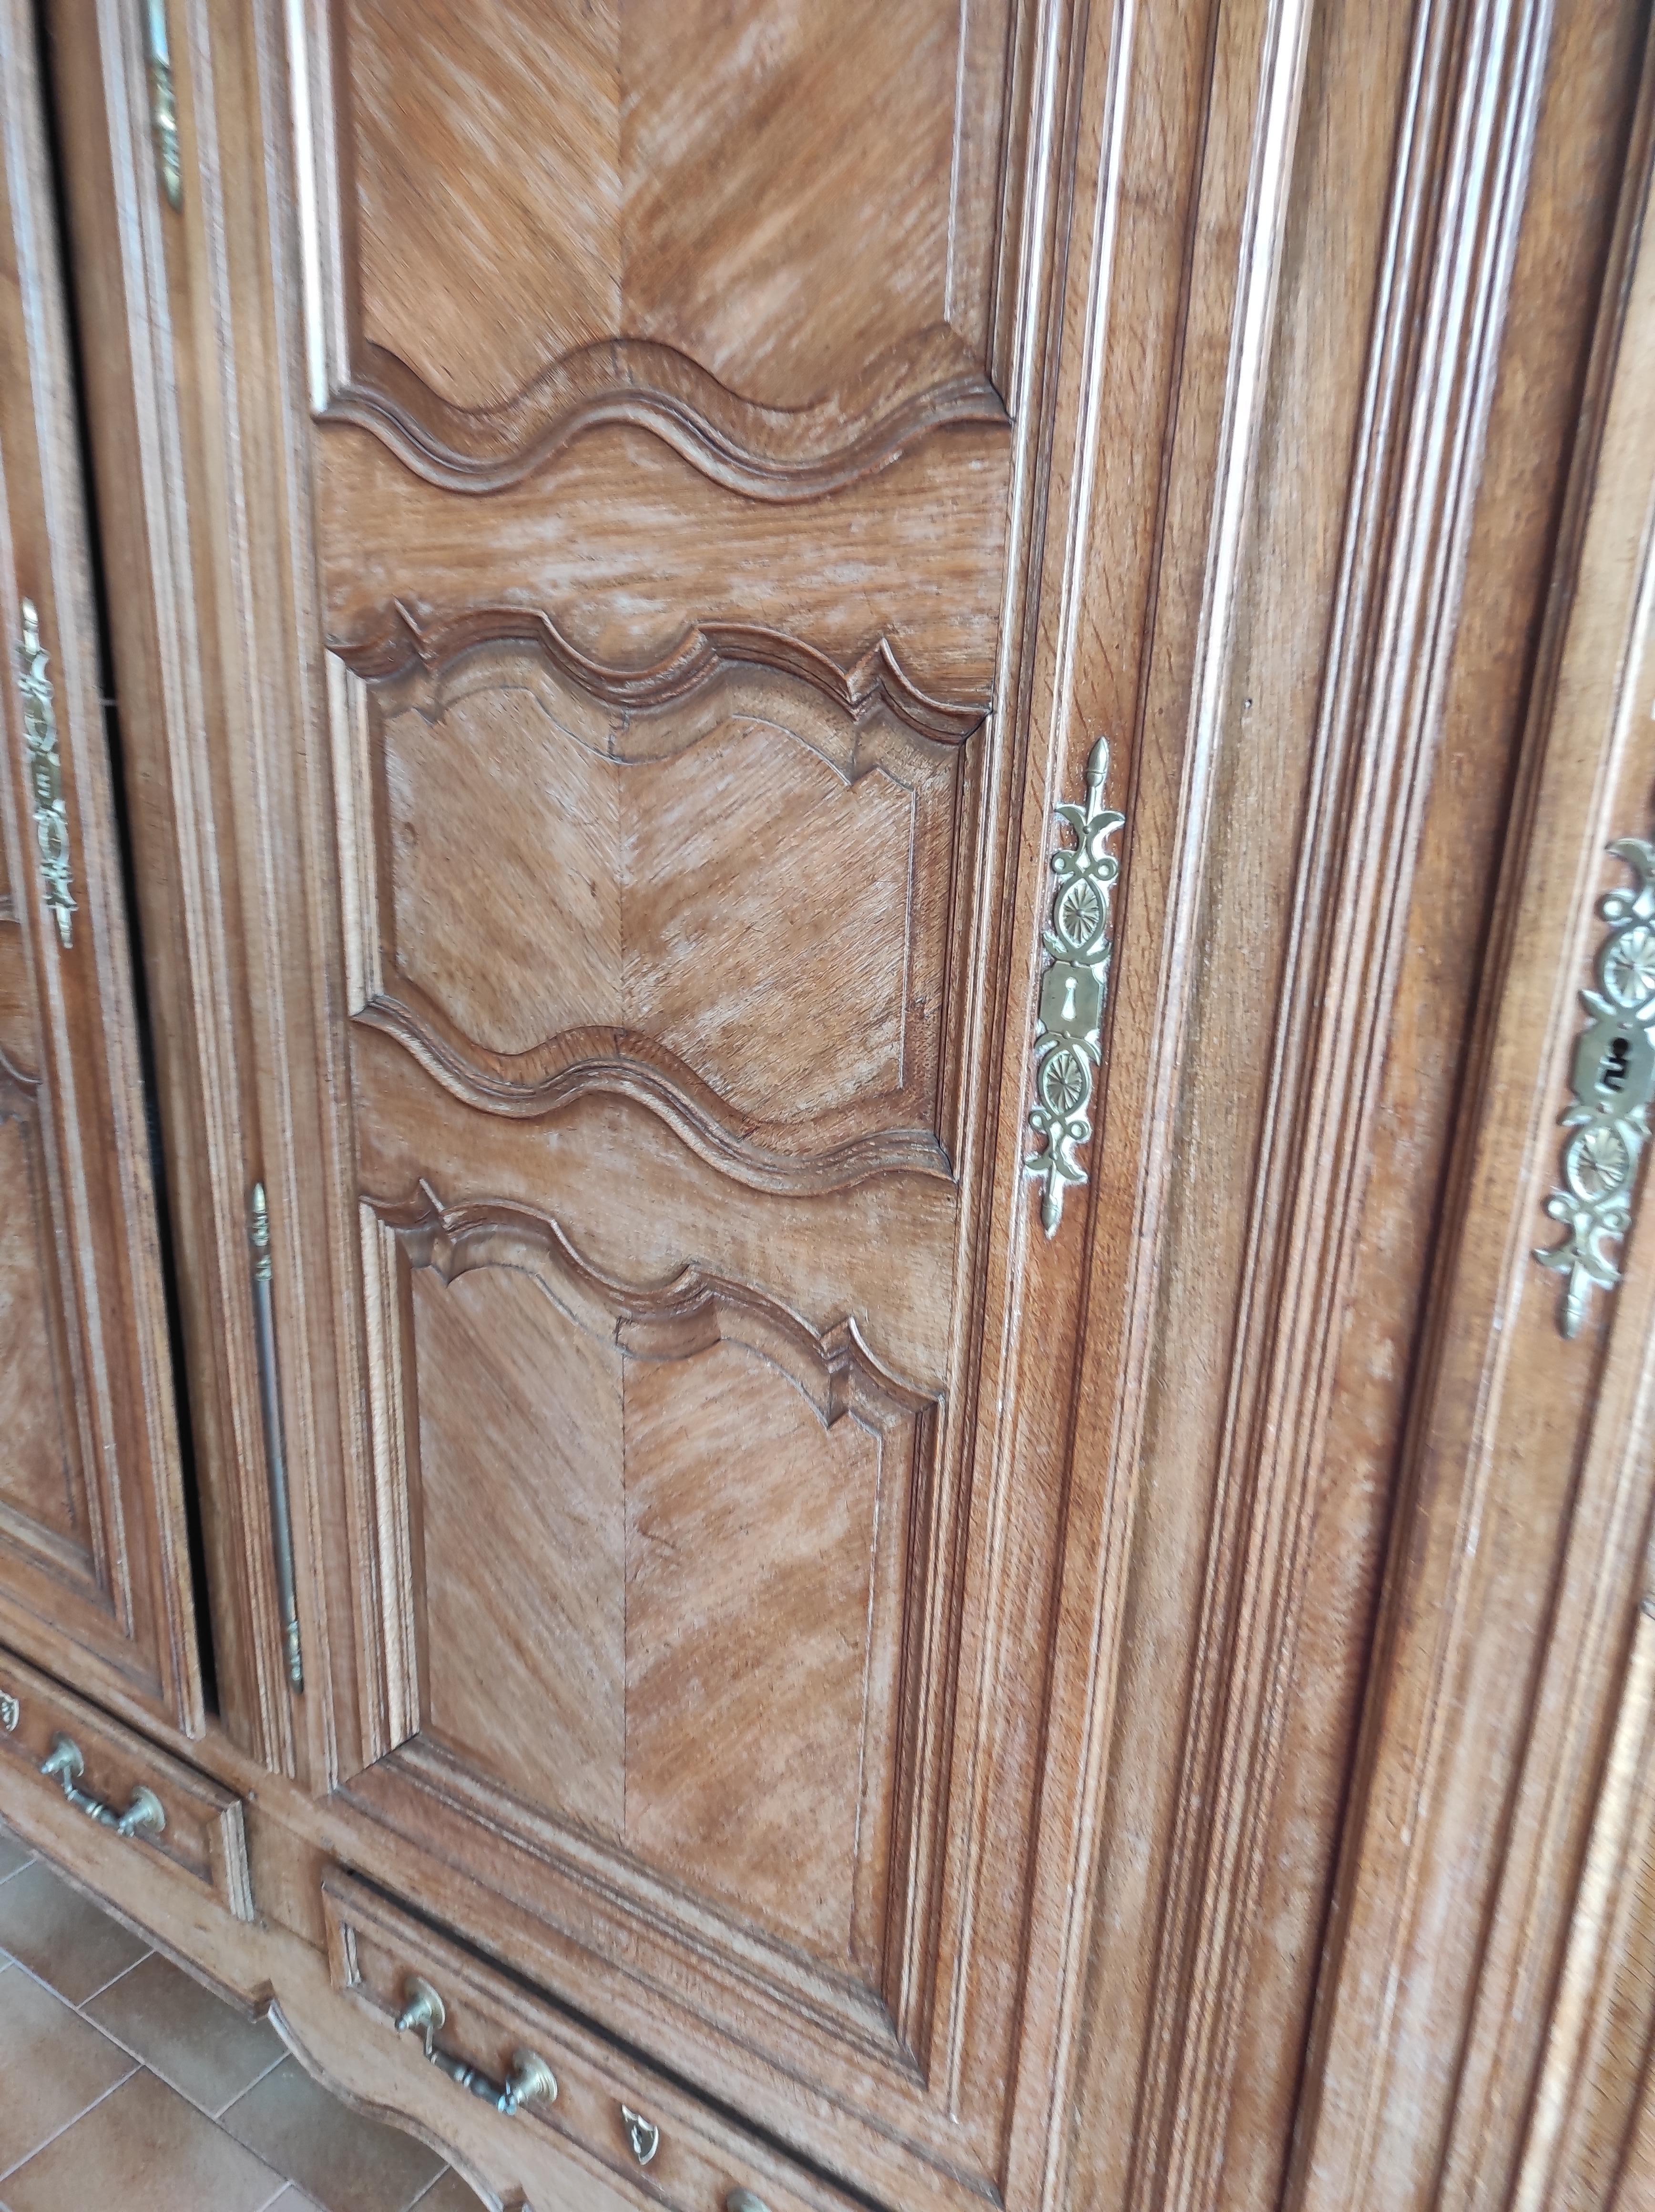 Three-door oak closet from Provence France.
It is complete with original interior shelves no lack concerning the part 